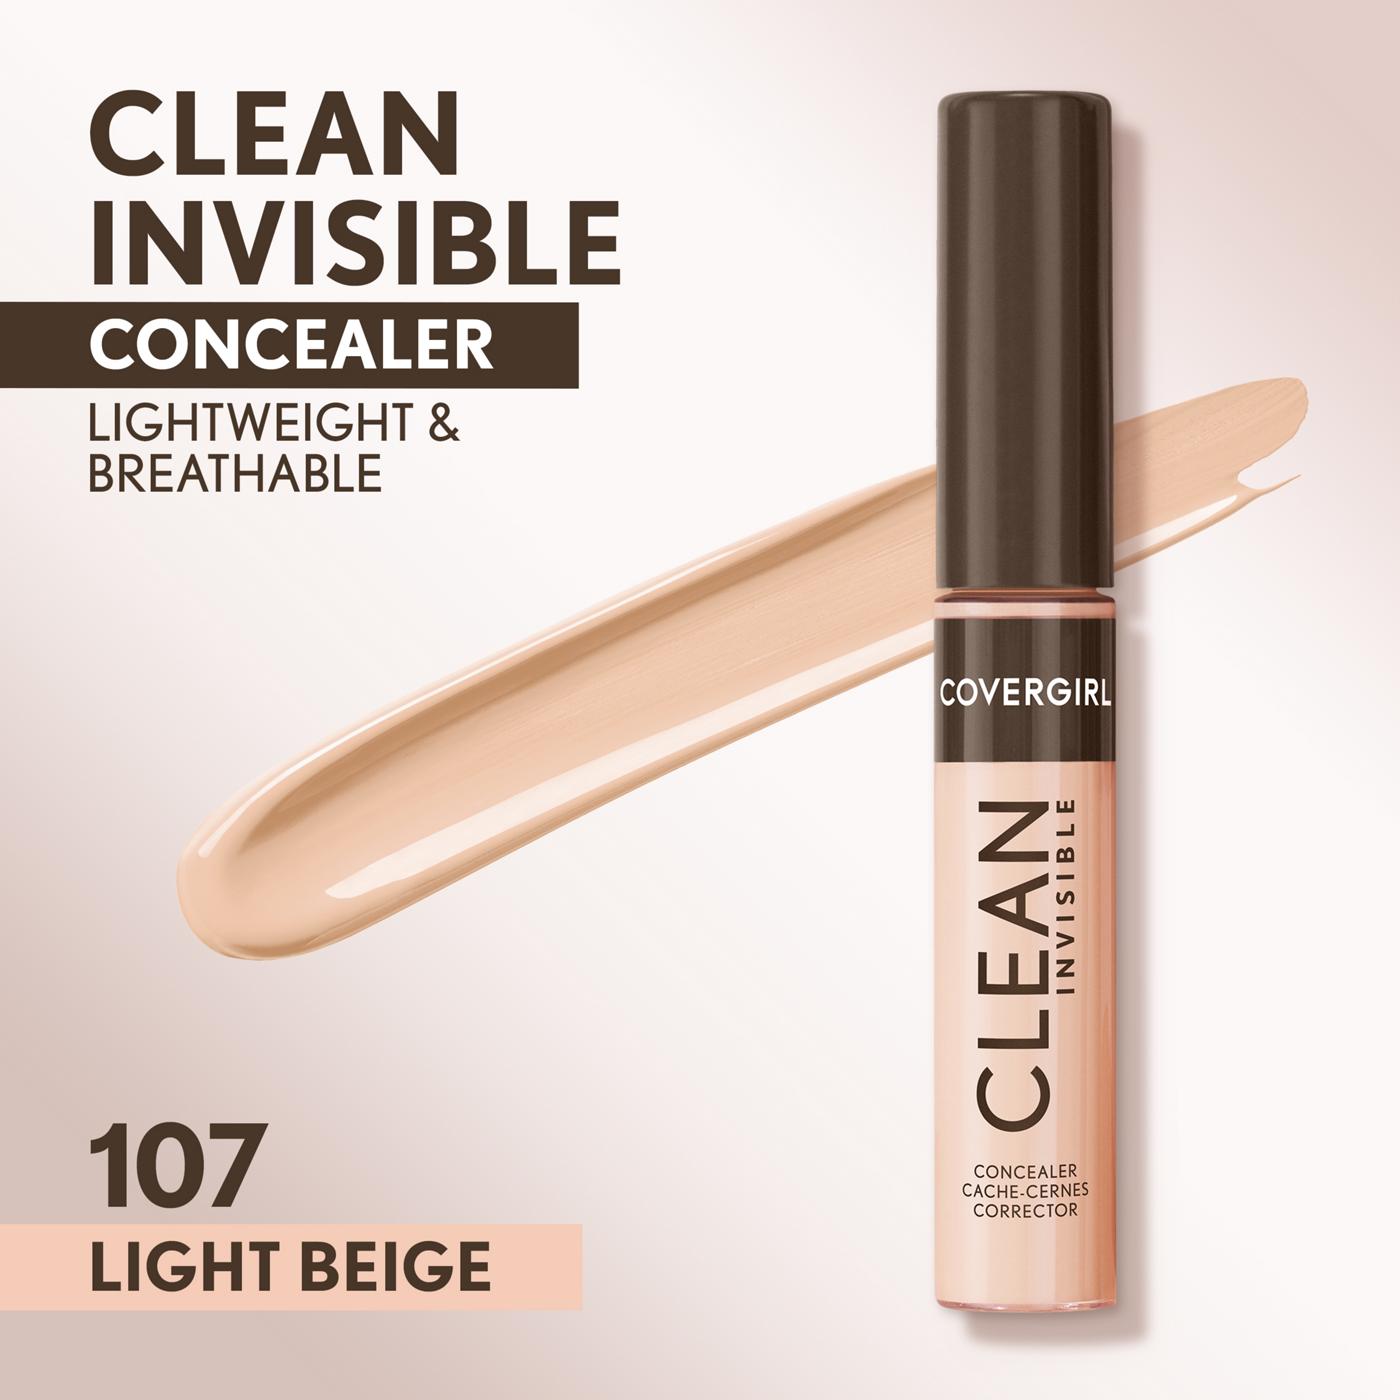 Covergirl Clean Invisible Concealer - Light Beige; image 6 of 15